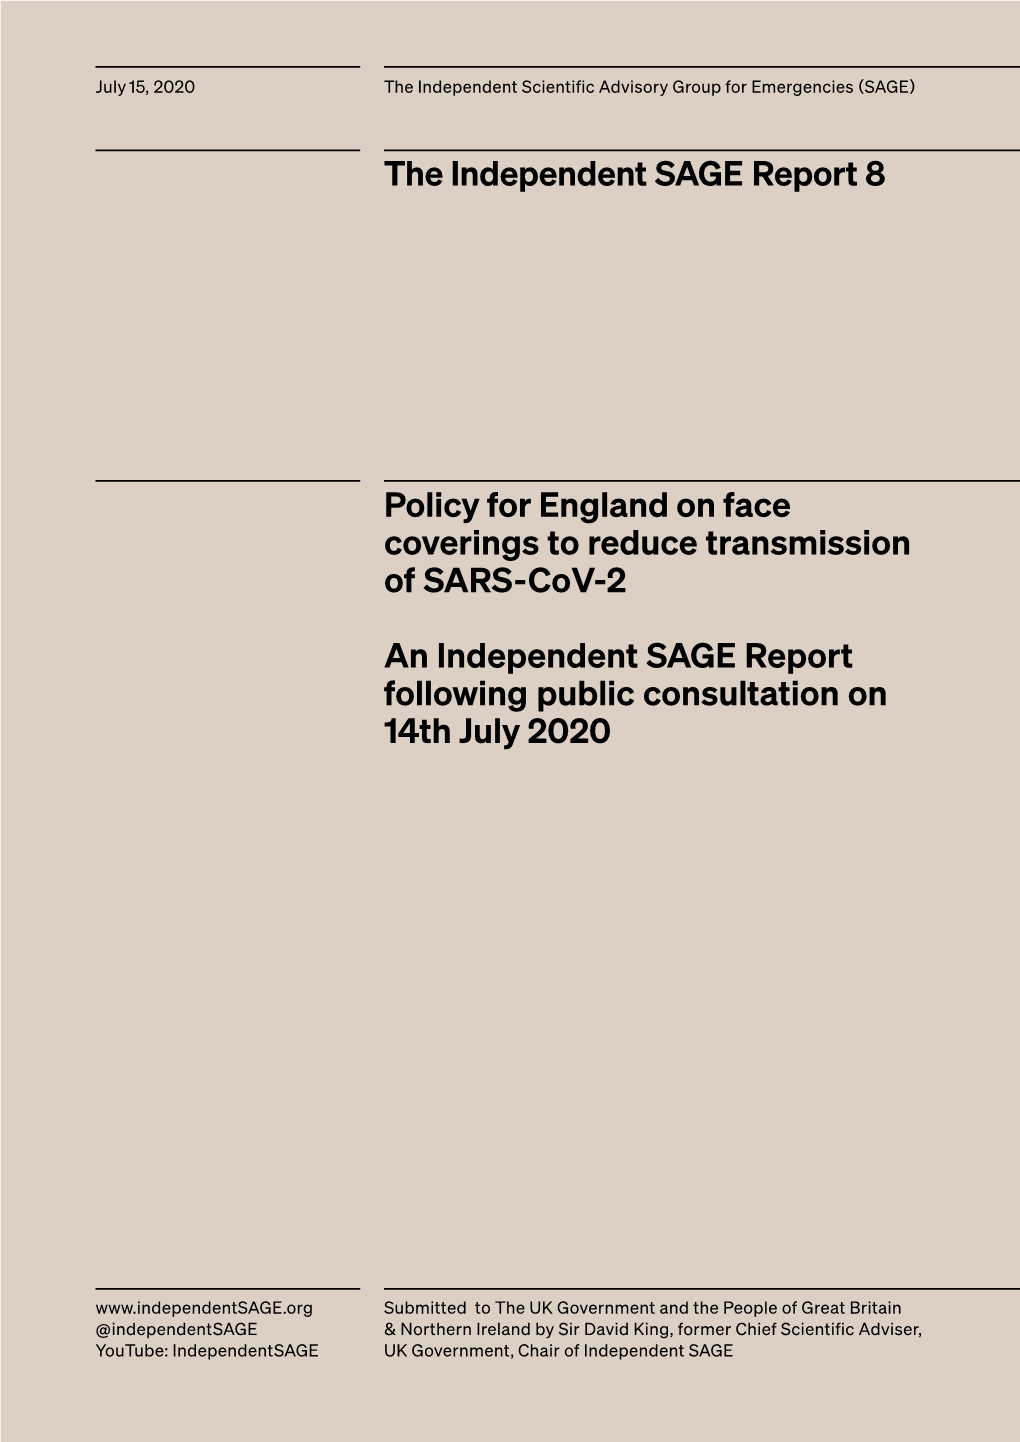 Policy for England on Face Coverings to Reduce Transmission of SARS-Cov-2